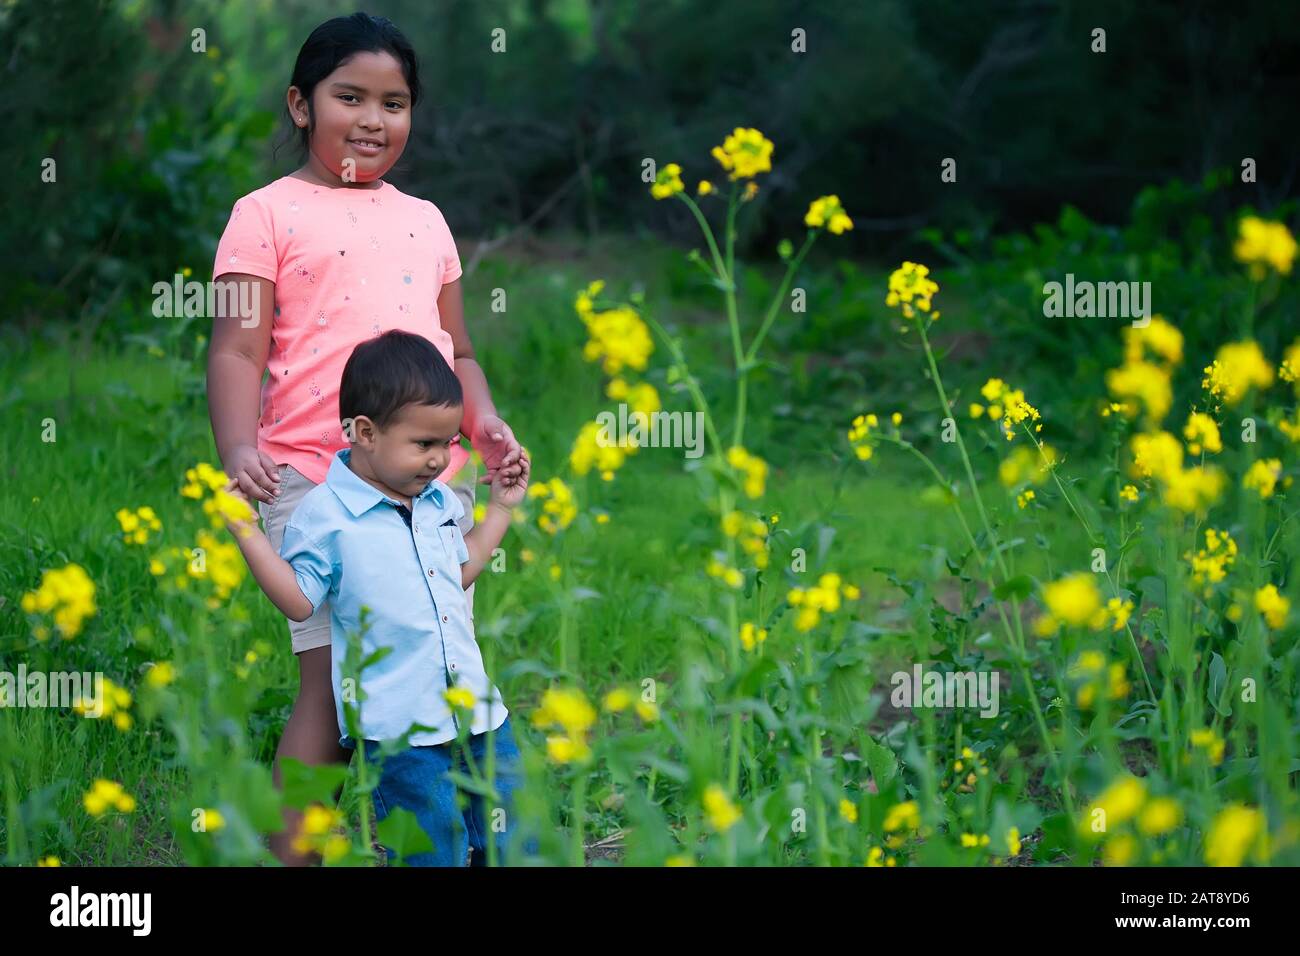 A big sister is helping her little brother walk through a nature trail full of yellow wild flowers. Stock Photo